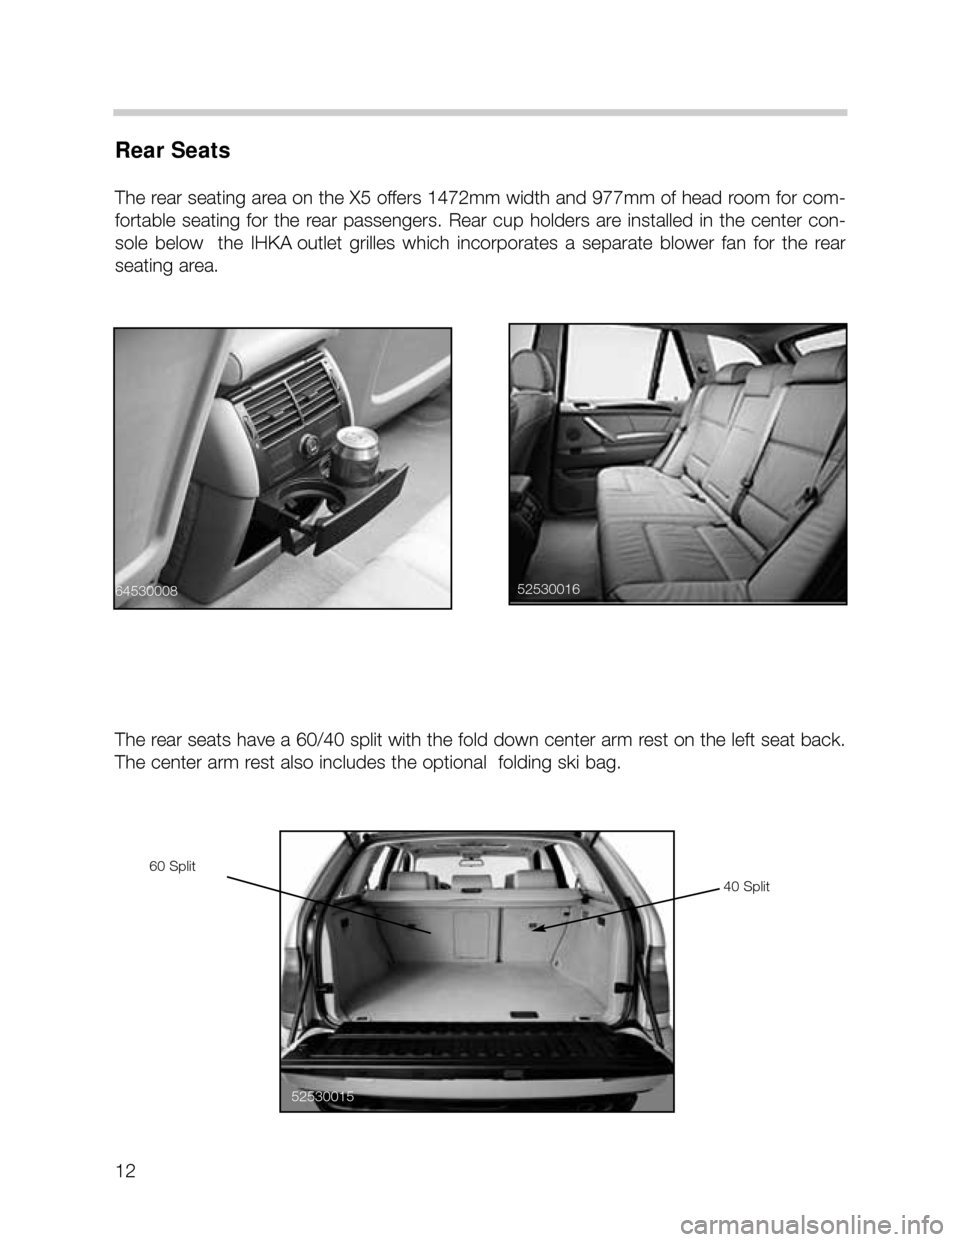 BMW X5 2003 E53 Workshop Manual 12
Rear Seats
The rear seating area on the X5 offers 1472mm width and 977mm of head room for com-
fortable  seating  for  the  rear  passengers.  Rear  cup  holders  are  installed  in  the  center  c